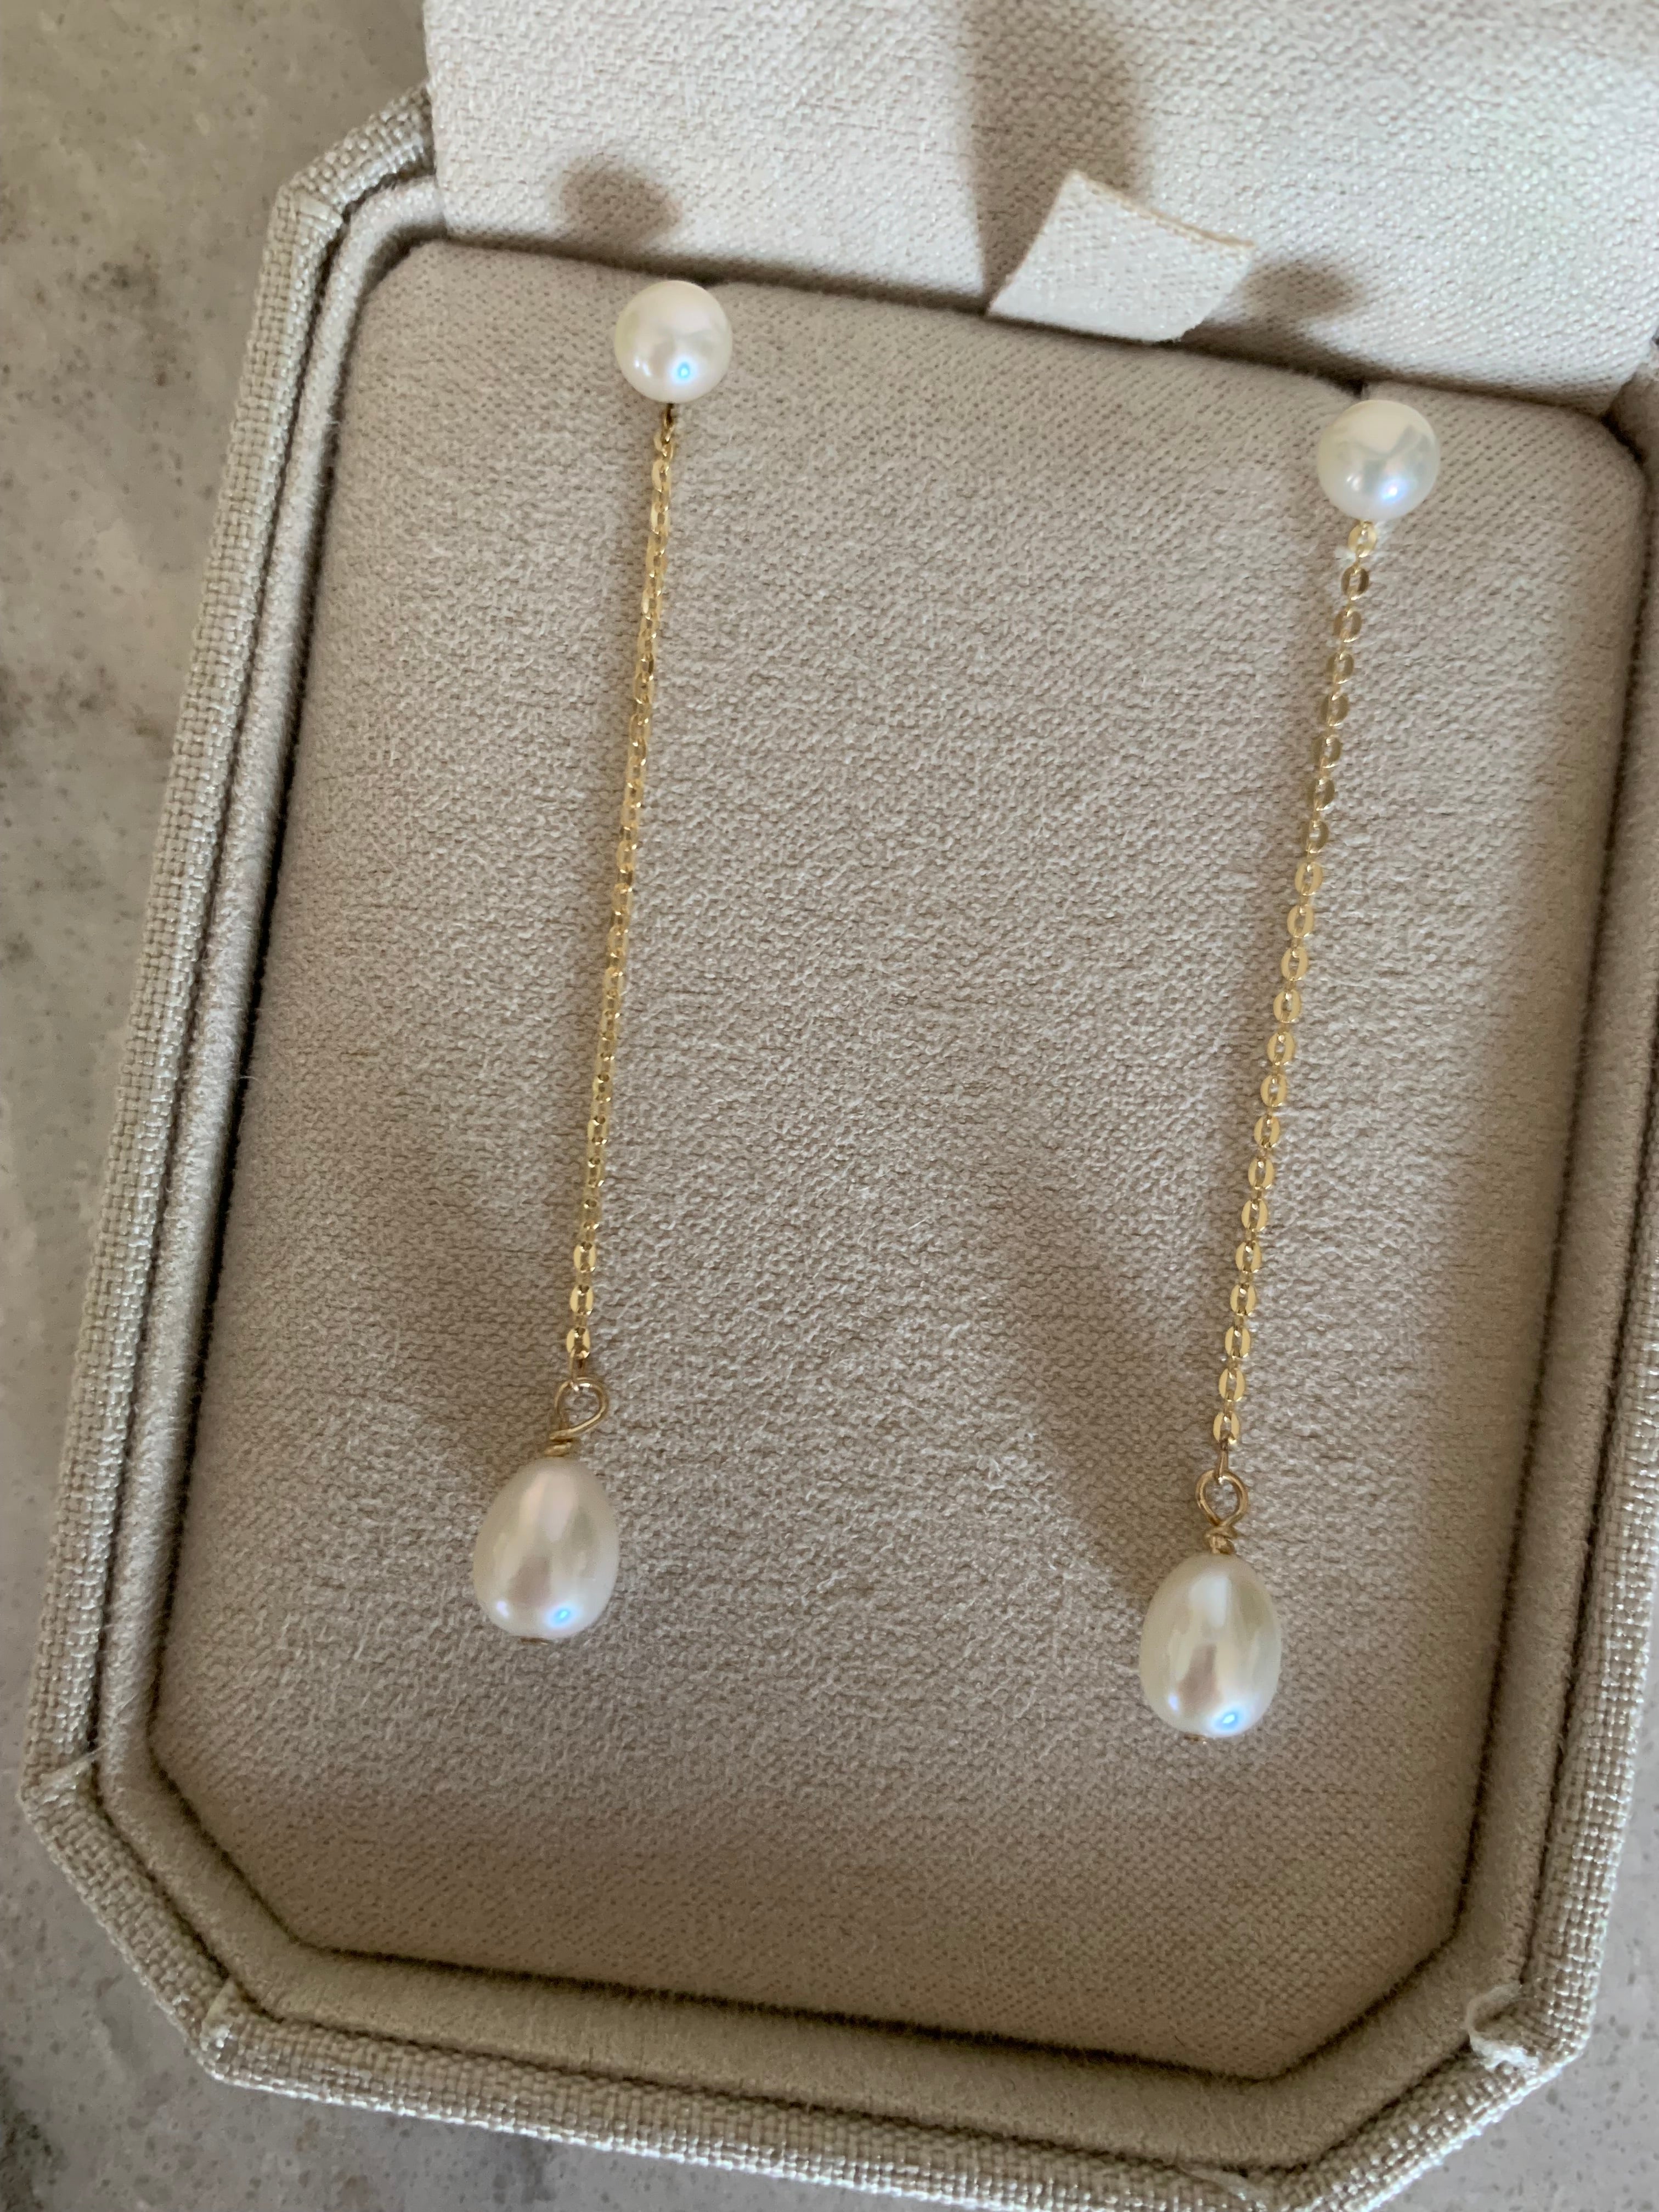 10k yellow gold pearl stud earrings plus removable chain drop